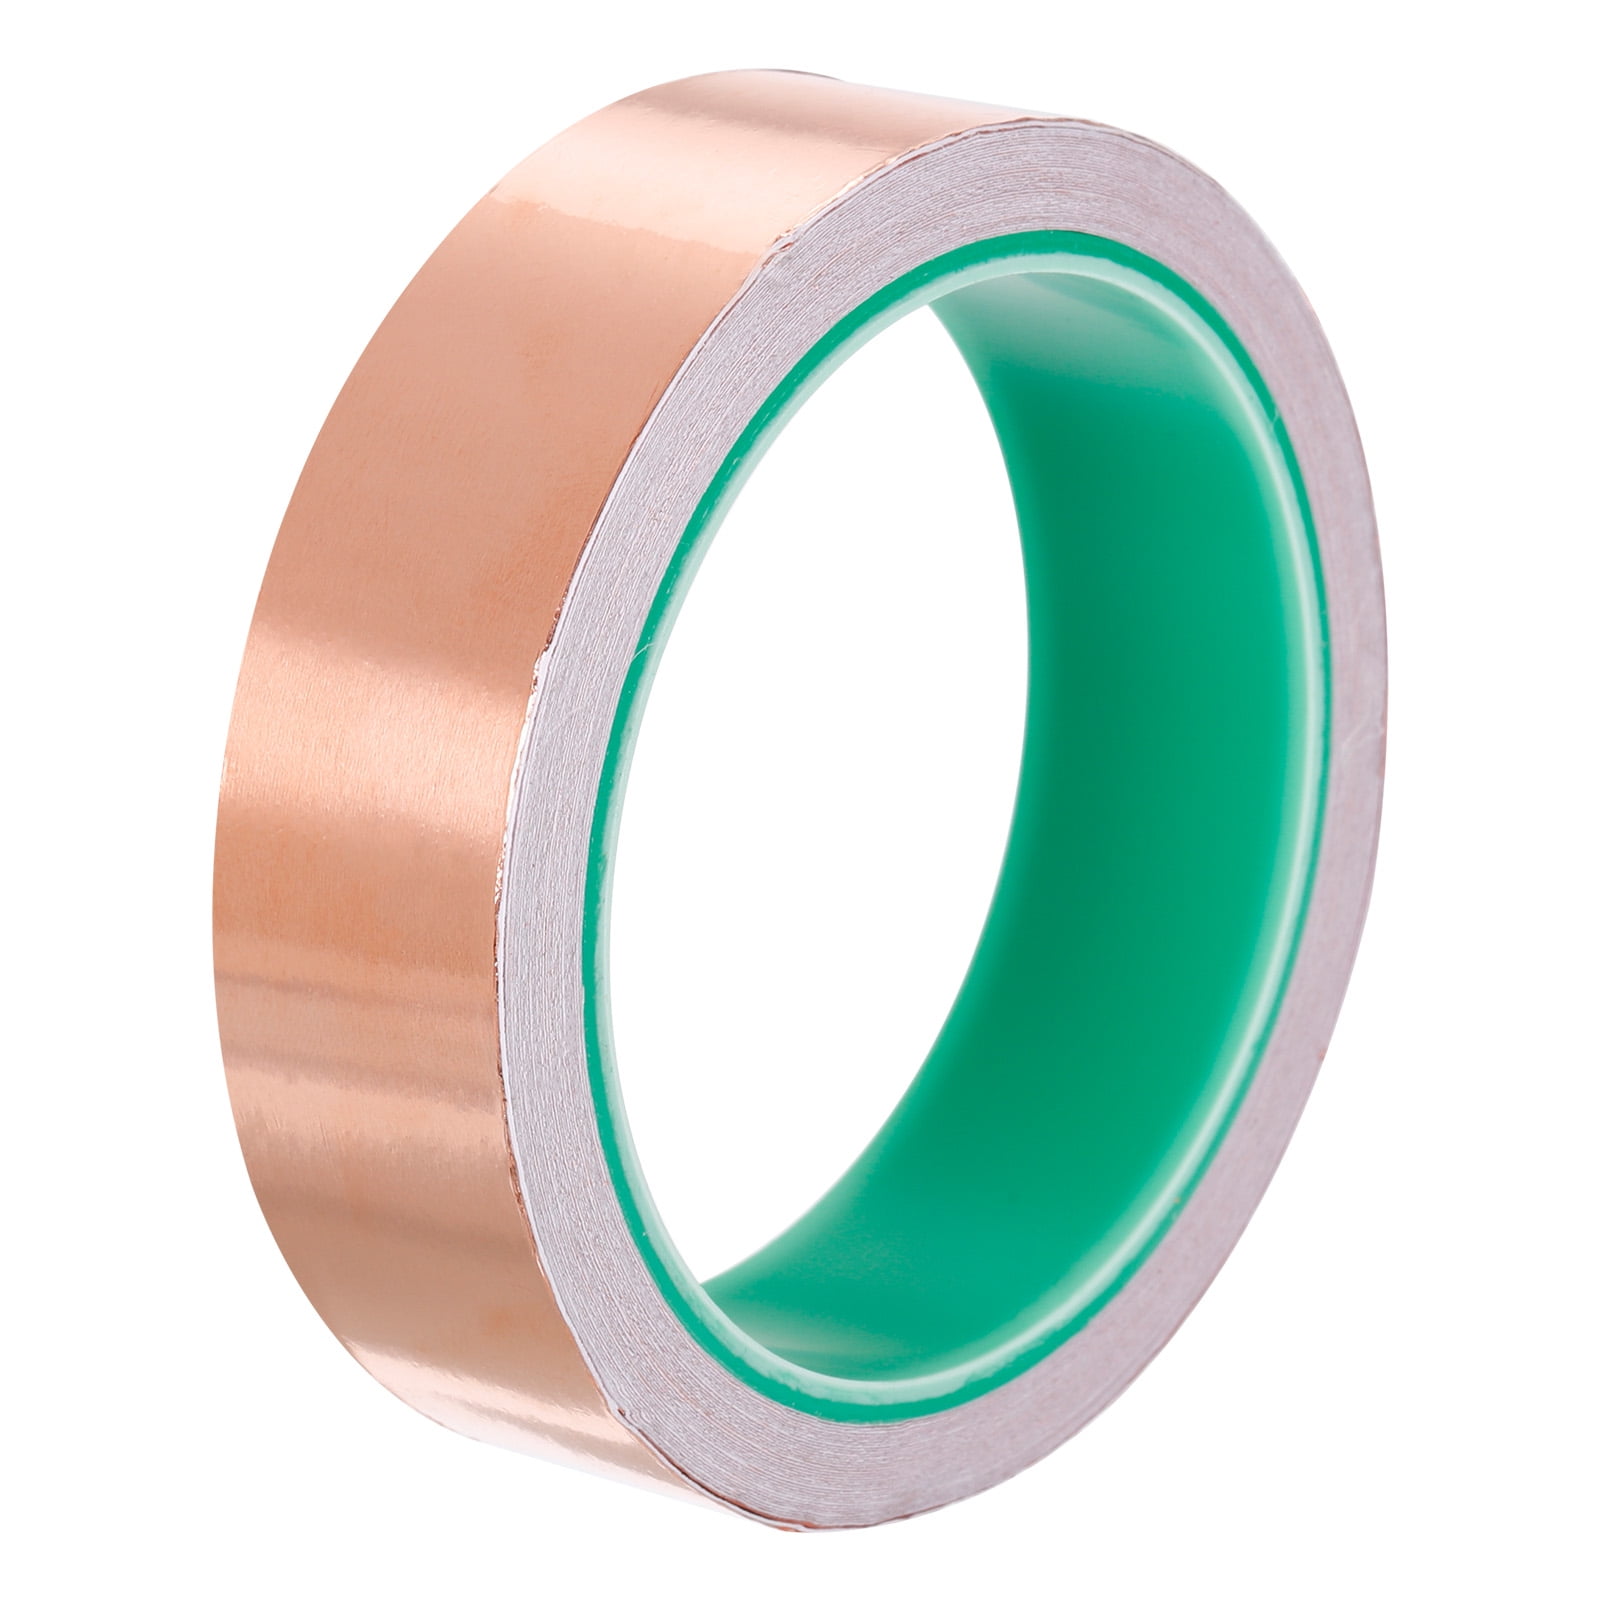 Koltose by Mash - Copper Foil Tape, Conductive Adhesive Tape for Electrical Repair, 2 Inches by 45 Feet